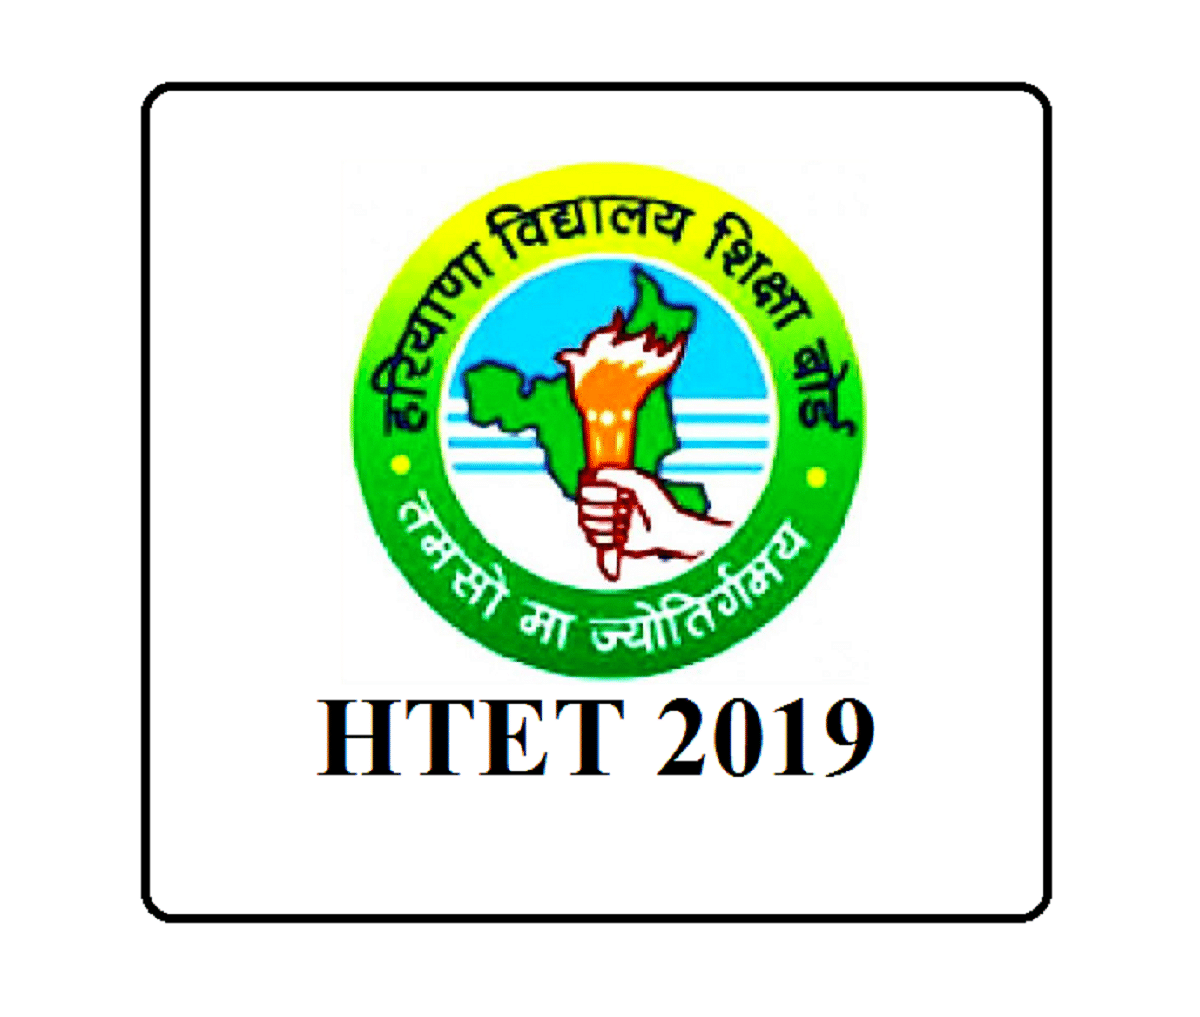 HTET 2019: Application Process to Conclude in 5 Days, Check the Latest Eligibility Criteria Here